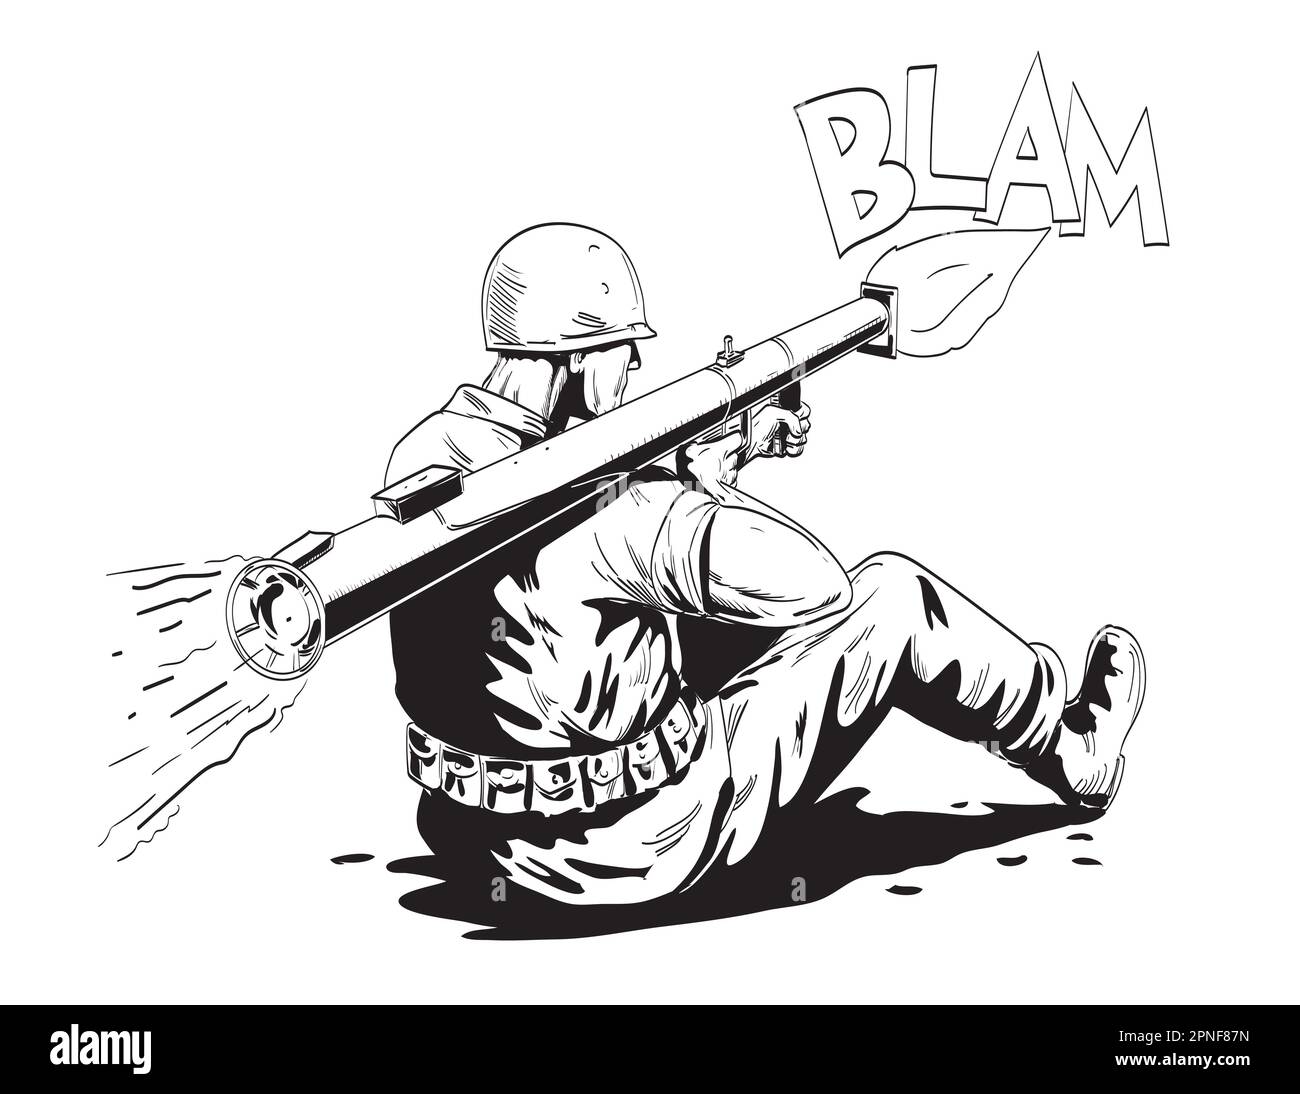 Comics style drawing or illustration of a World War Two American GI soldier firing bazooka or stovepipe viewed from rear on isolated background in bla Stock Photo